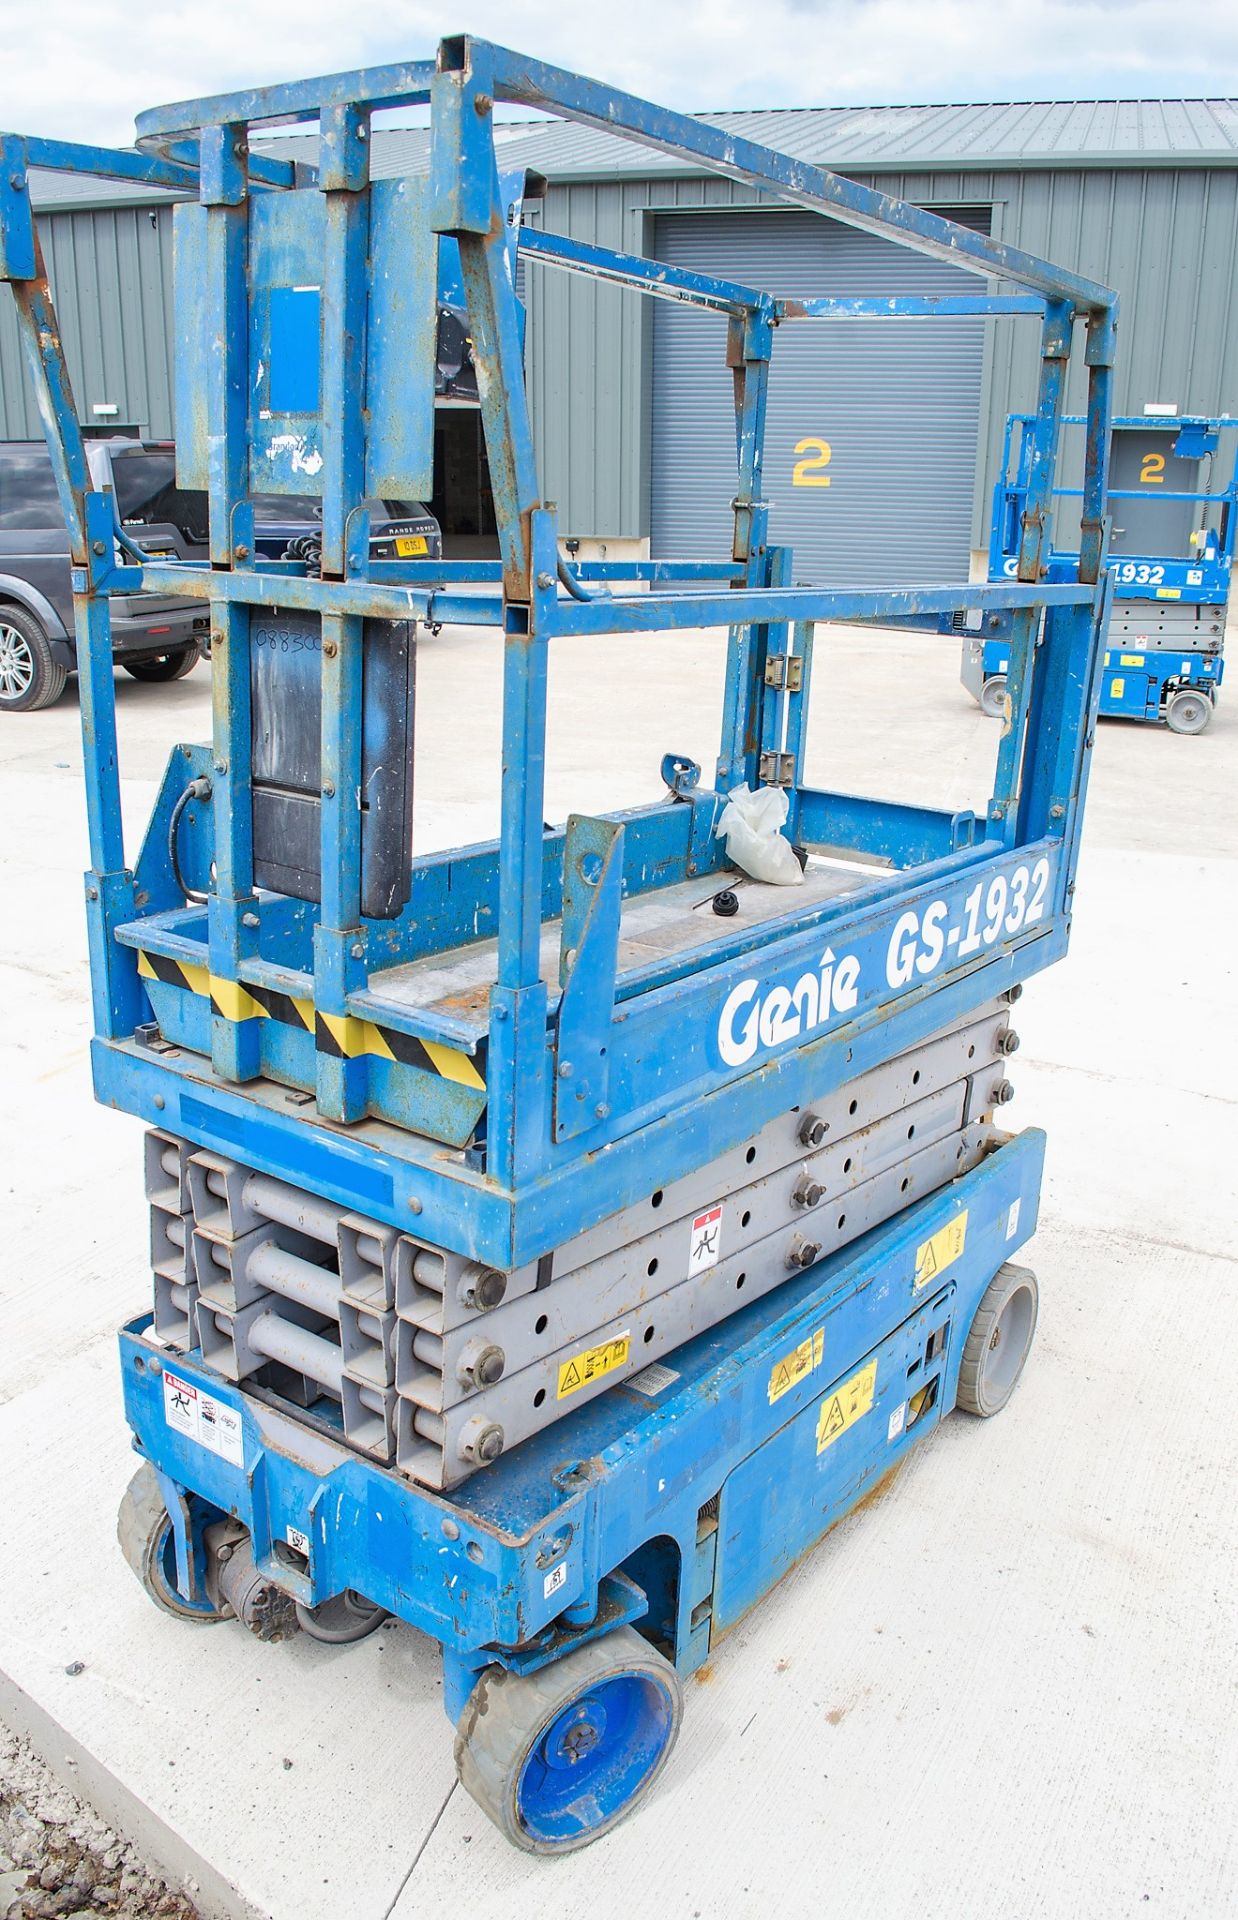 Genie GS 1932 battery electric scissor lift Year: 2008 Recorded Hours: 272 08830050 - Image 3 of 6